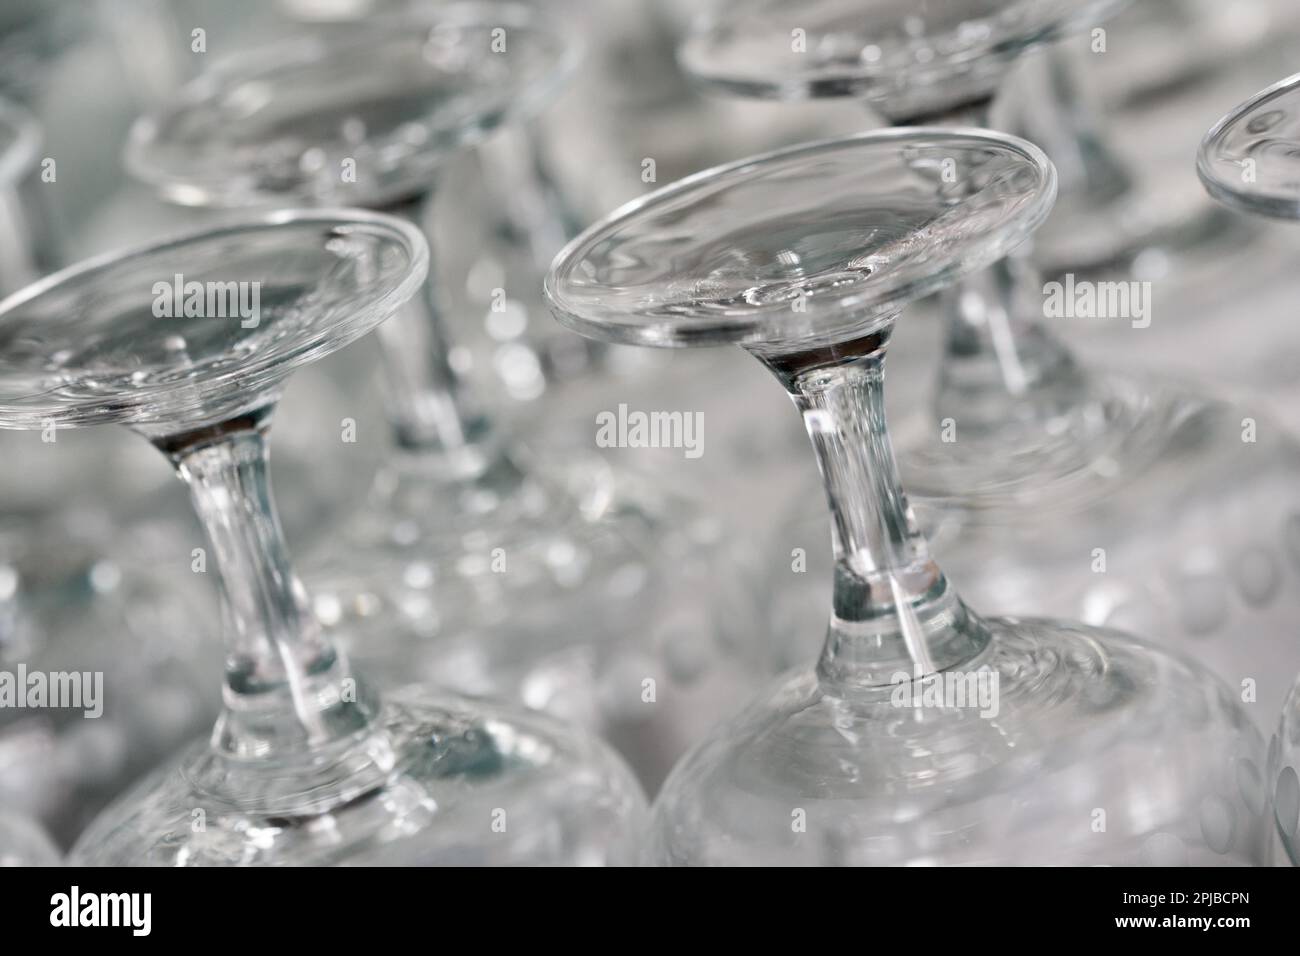 Lots of champagne glasses in the bar counter Stock Photo